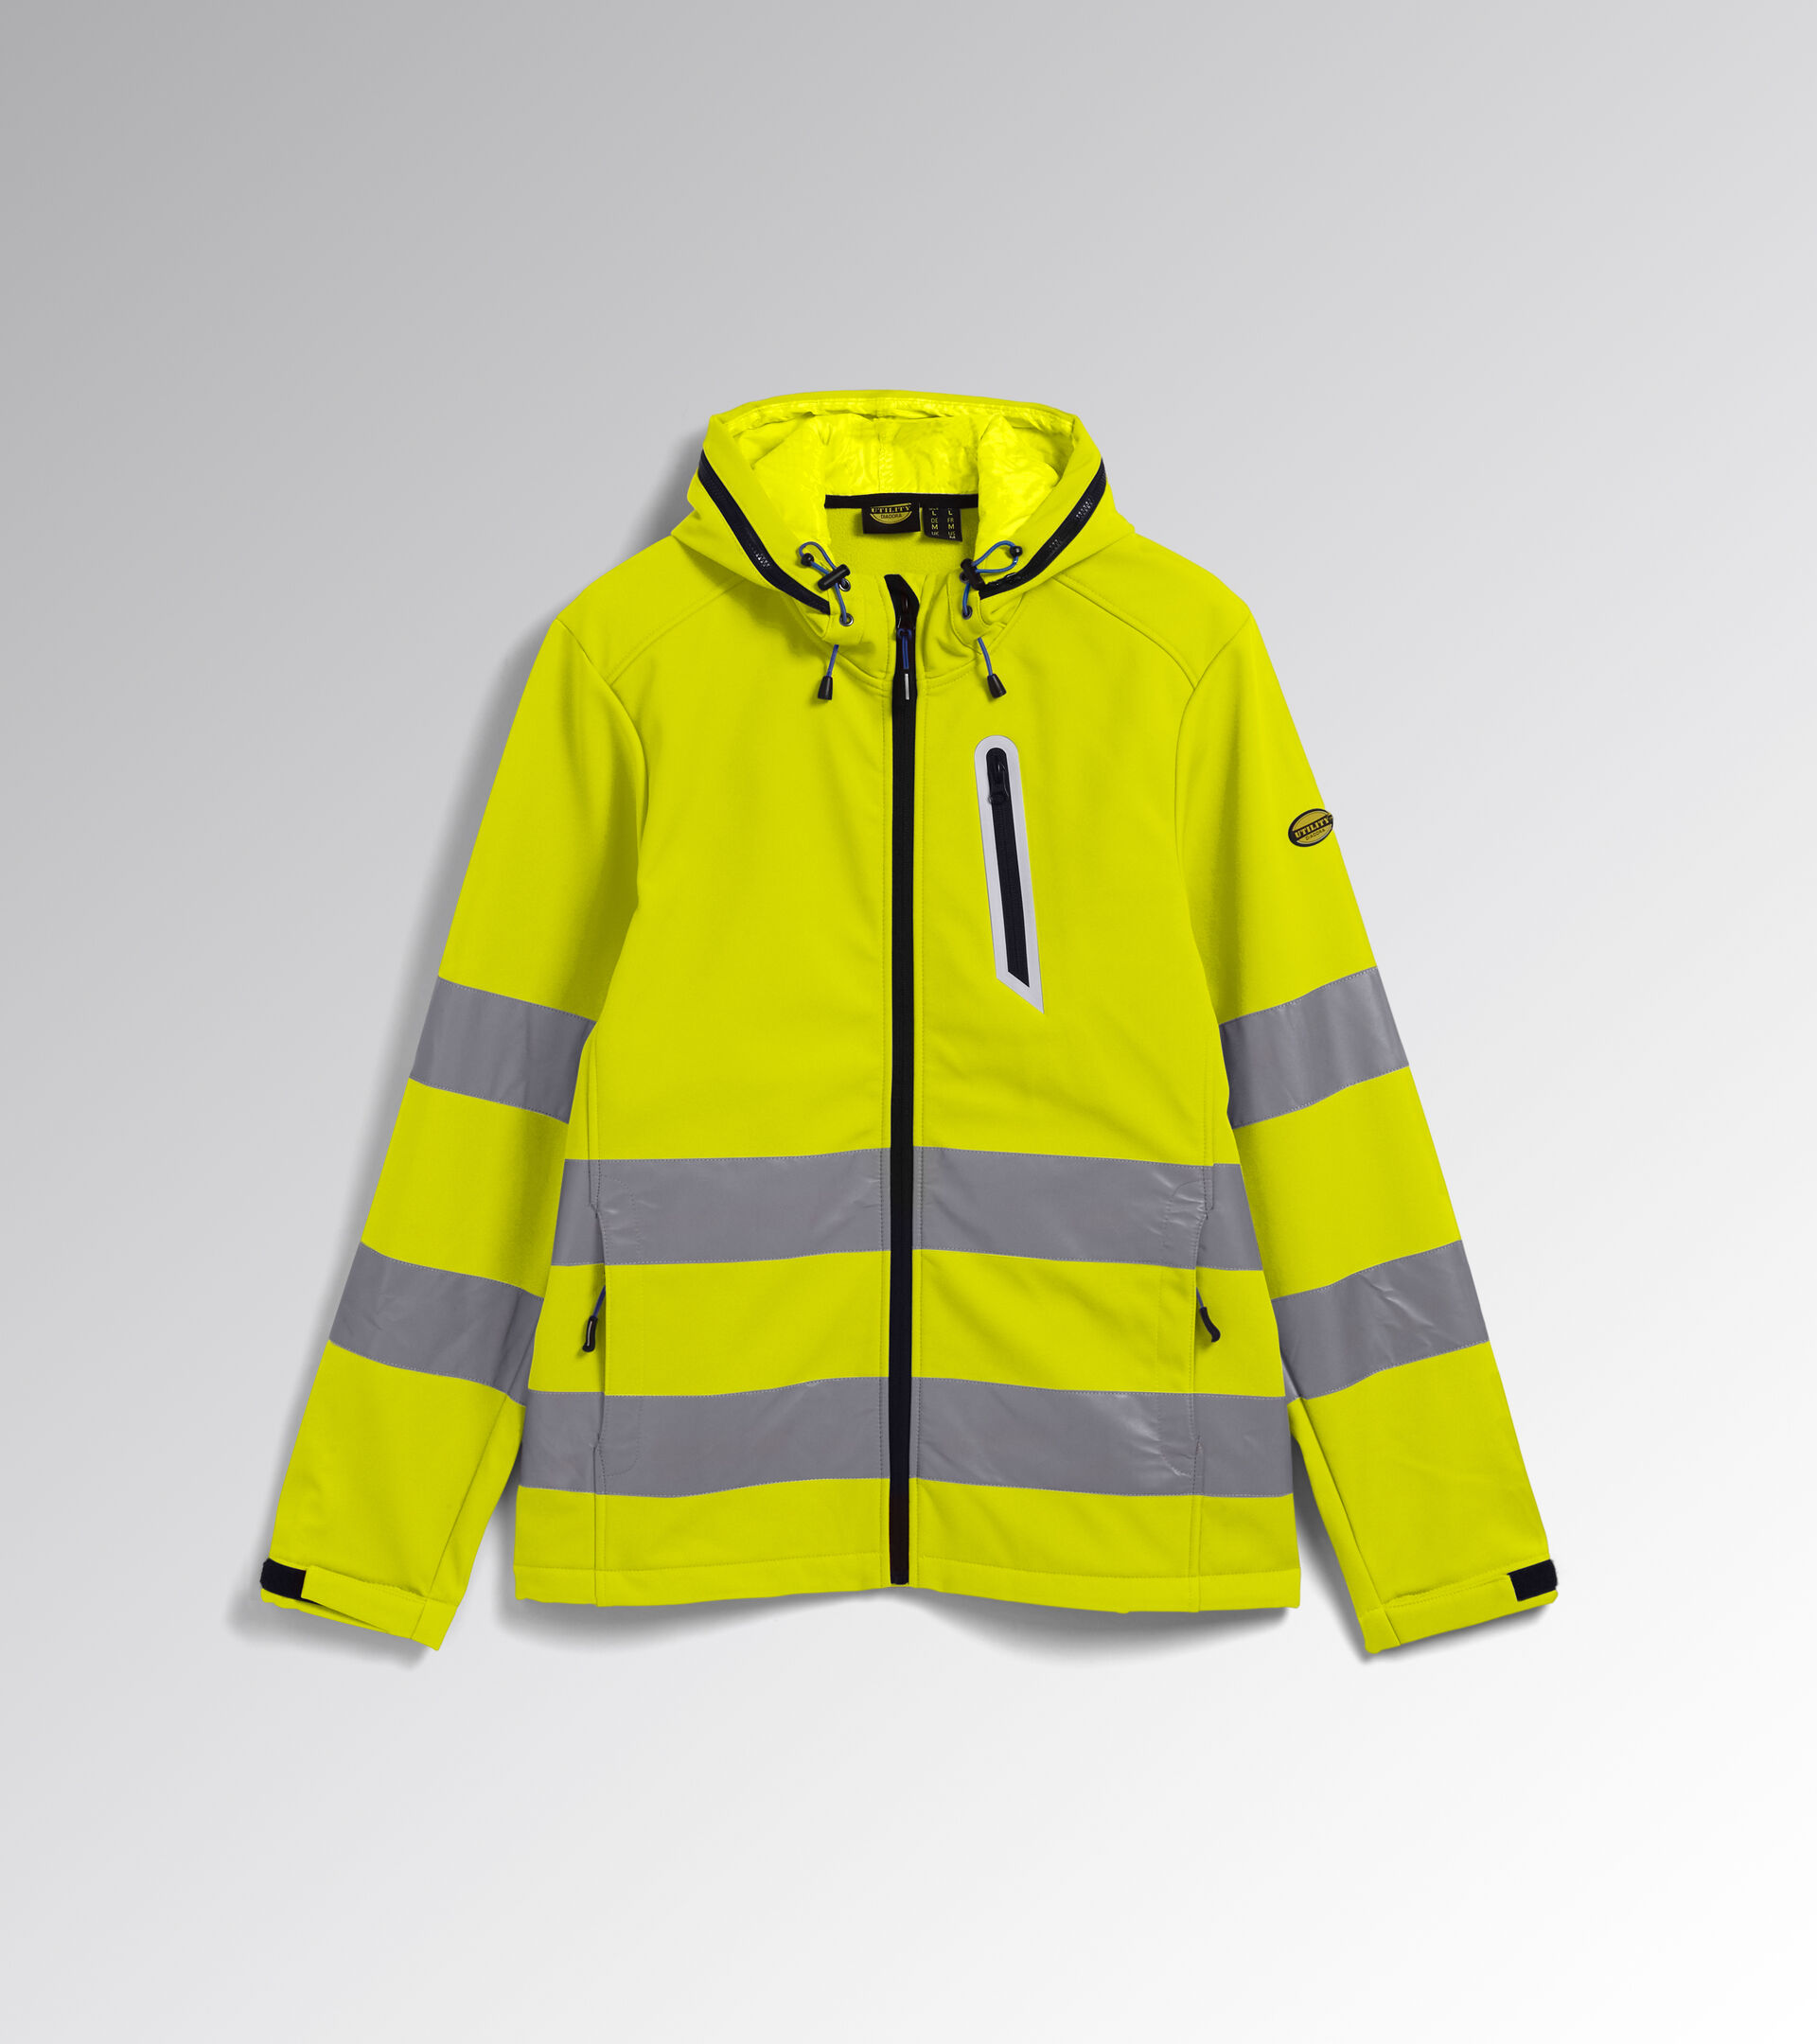 SOFTSHELL HV 20471:2013 3, FLUORESCENT YELLOW ISO20471, hi-res